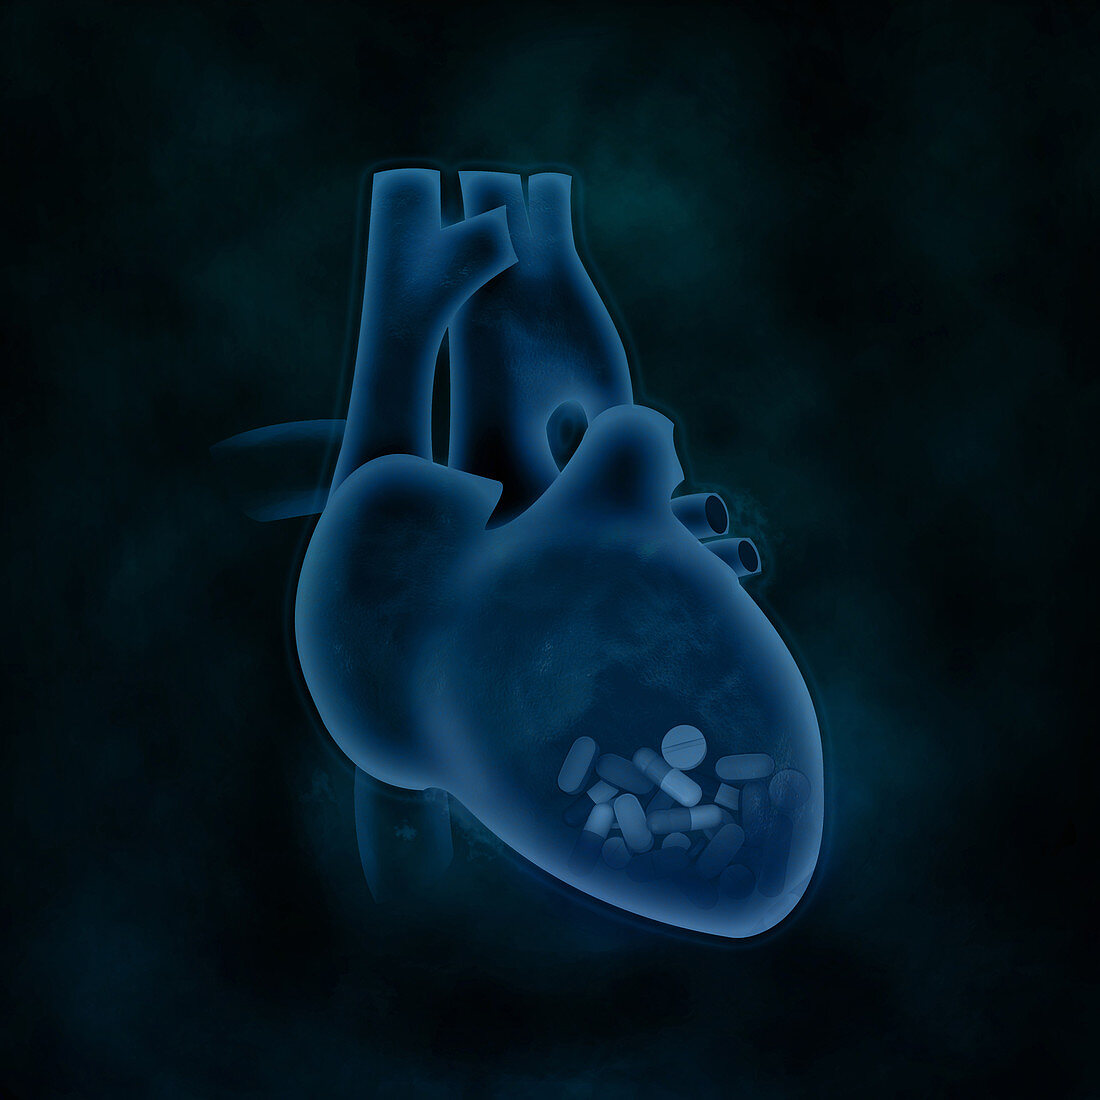 Conceptual illustration of heart issues